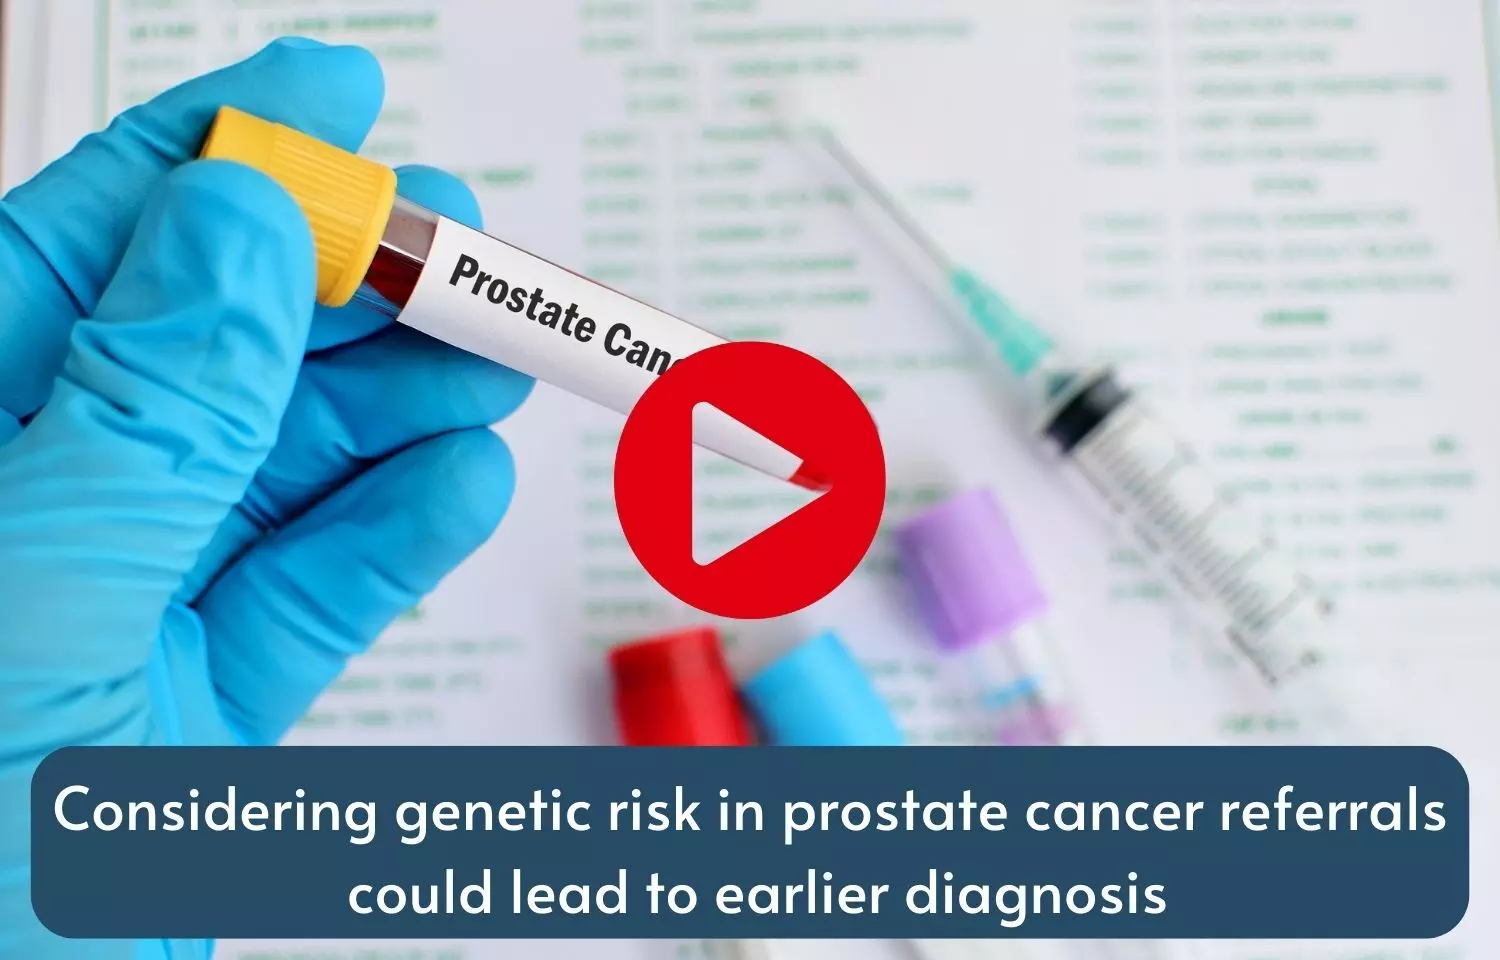 Considering genetic risk in prostate cancer referrals could lead to earlier diagnosis